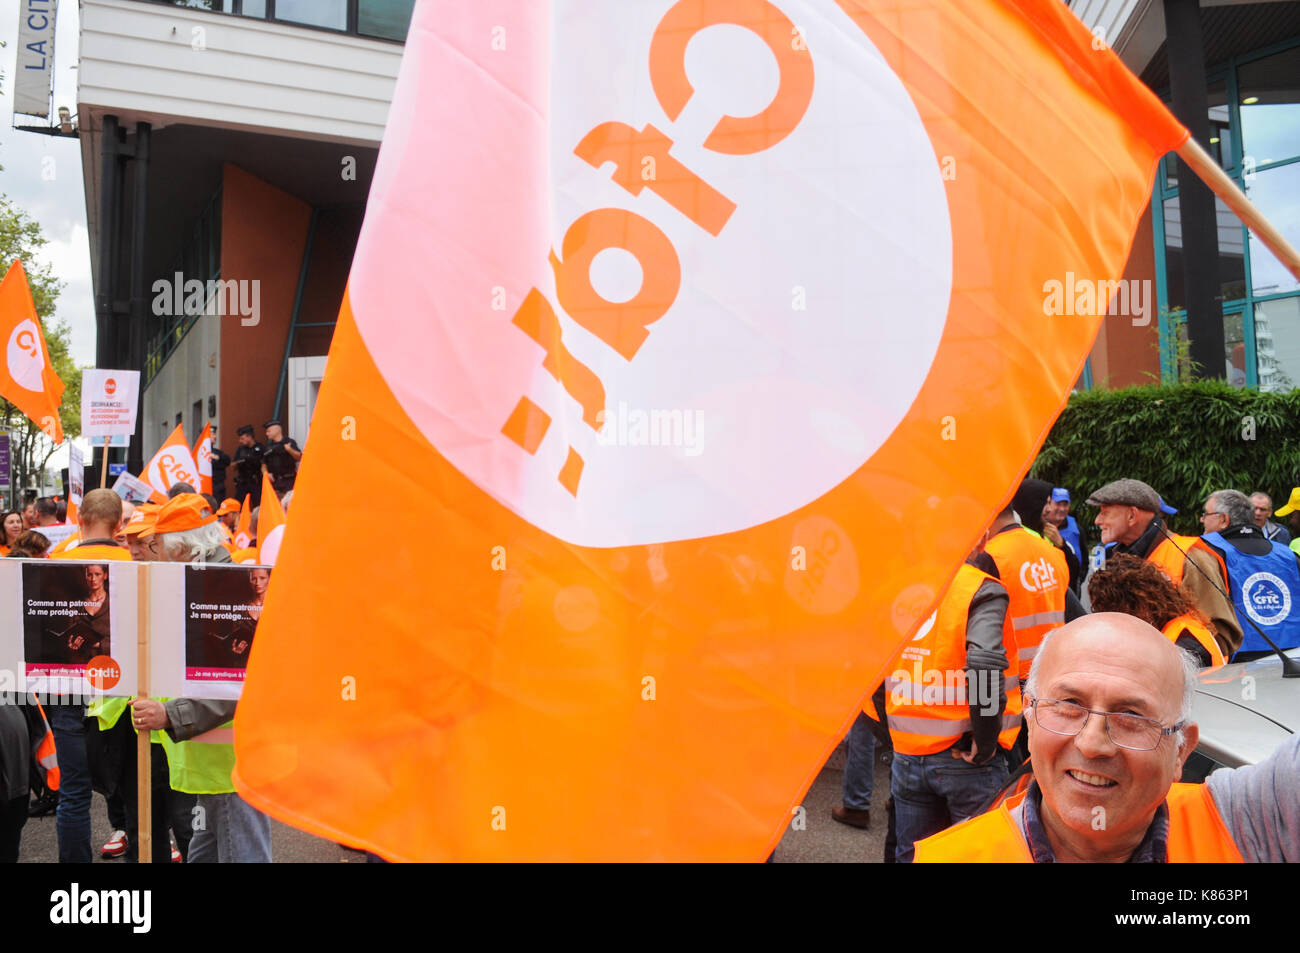 LYON, FRANCE, SEPTEMBER 18, 2017 : Members of CFDT and CFTC trade unions, mostly from the Transports section, stand in front of the MEDEF headquarter in Lyon (South-Eastern France) on September 18, 2017 to protest against government policy and especially ordonancies on Labour Law. Credit: Serge Mouraret/Alamy Live News Stock Photo